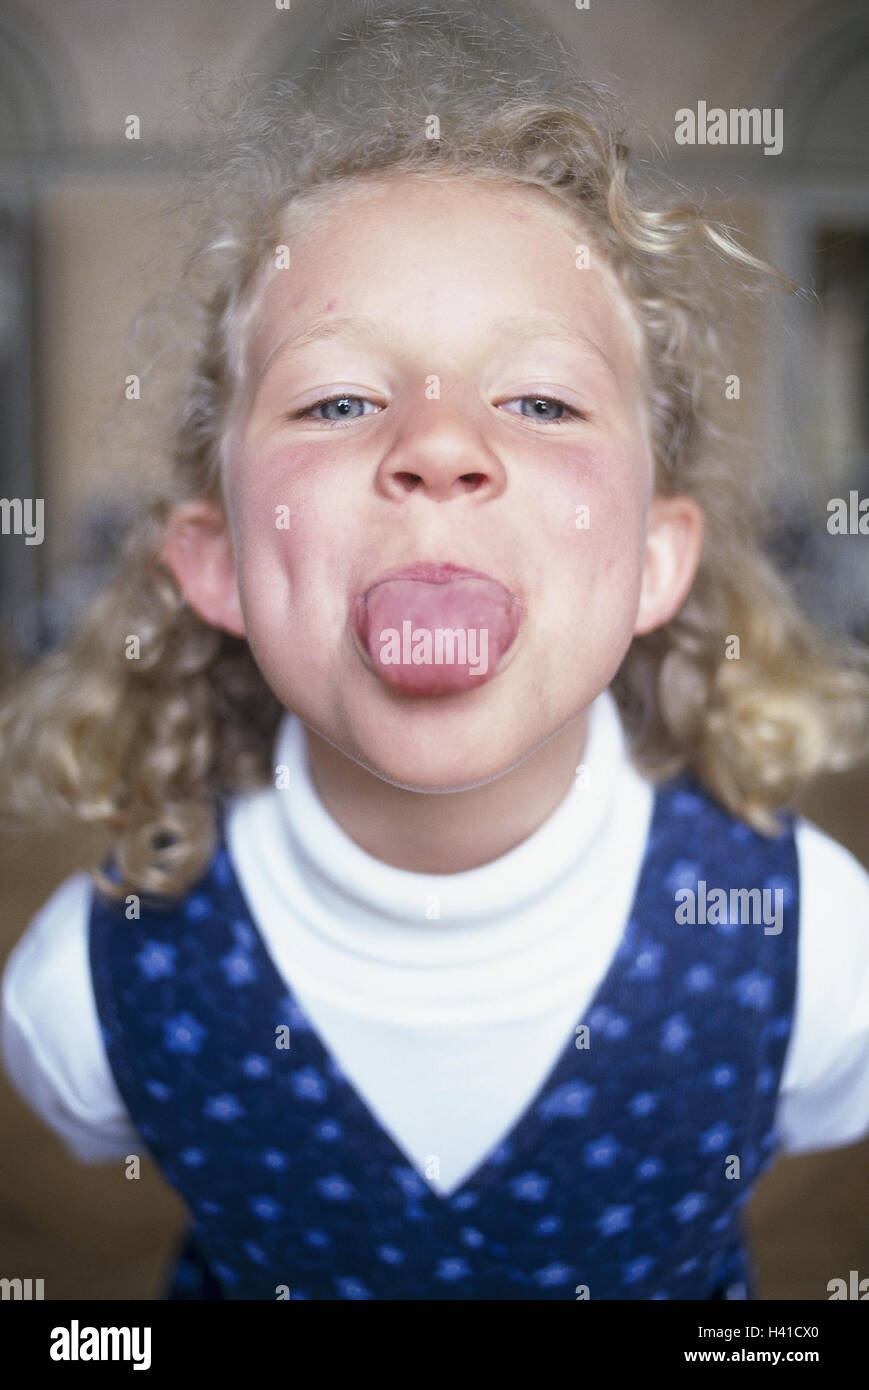 Girls, blond, tongue point, portrait, very close, inside, child, 6 years, long-haired, curls, fun, provocation, insults, bad habit, naughtily, impolitely, cheeky, perky, cheeky, education, tongue stick out Stock Photo